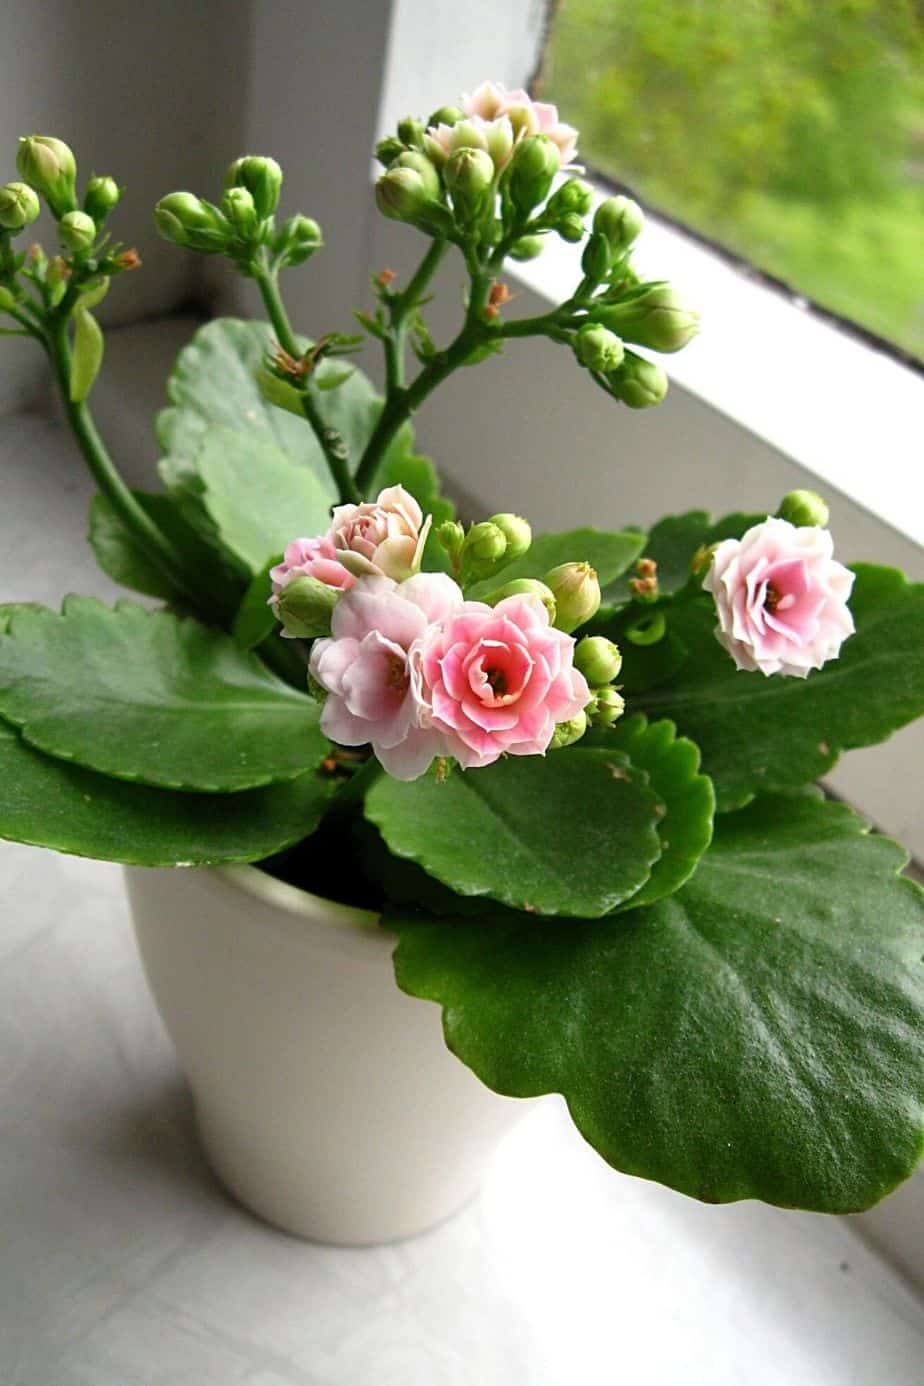 Kalanchoe is a succulent blooming plant that thrives well when placed in a southwest-facing window